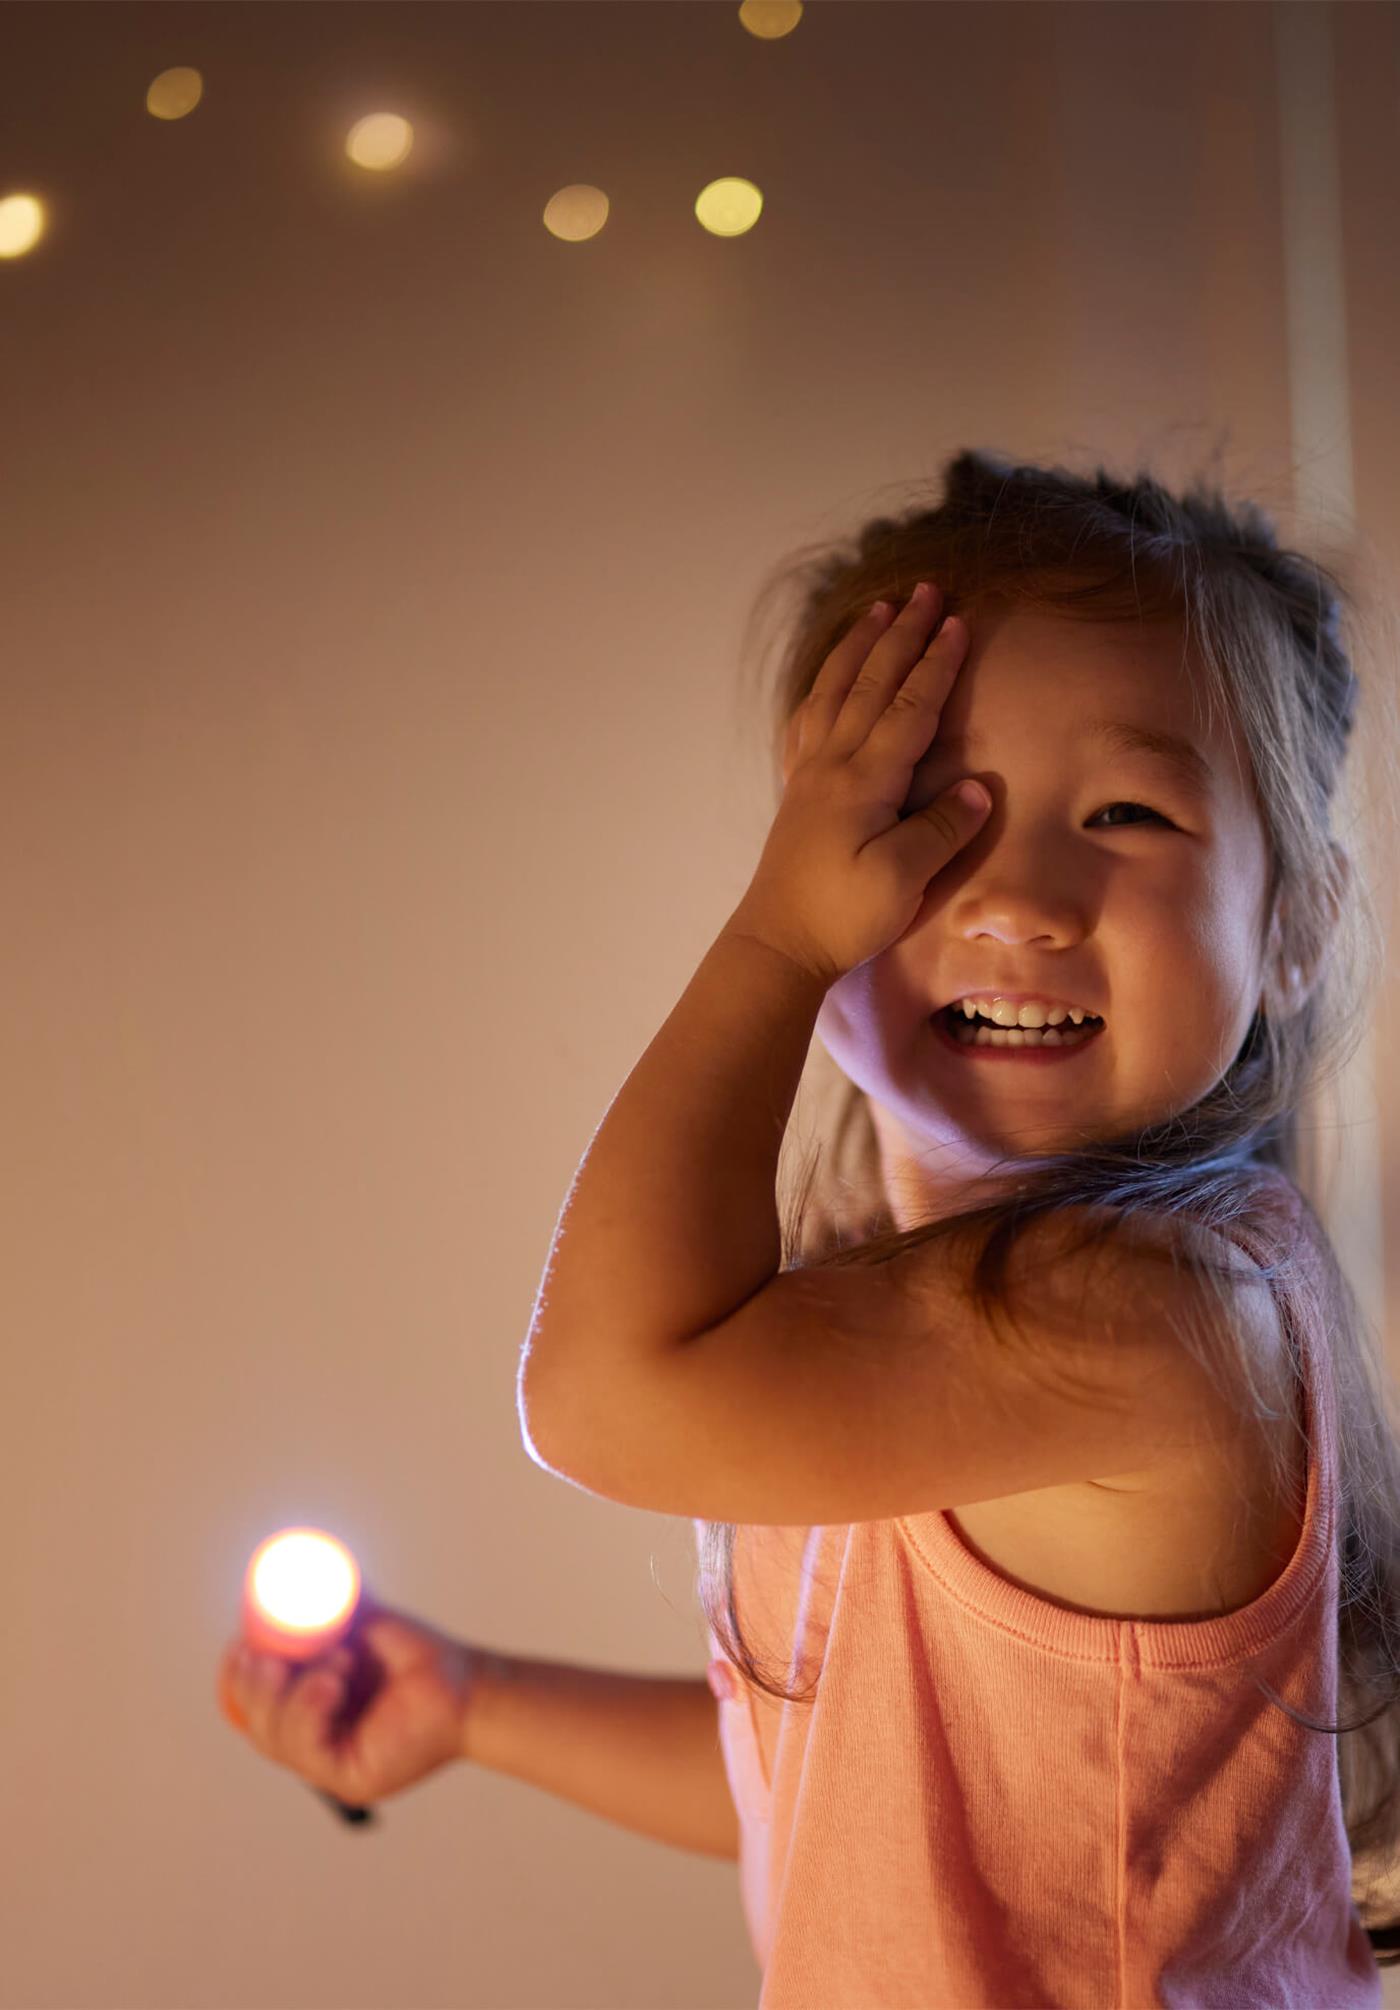 Child playing with light